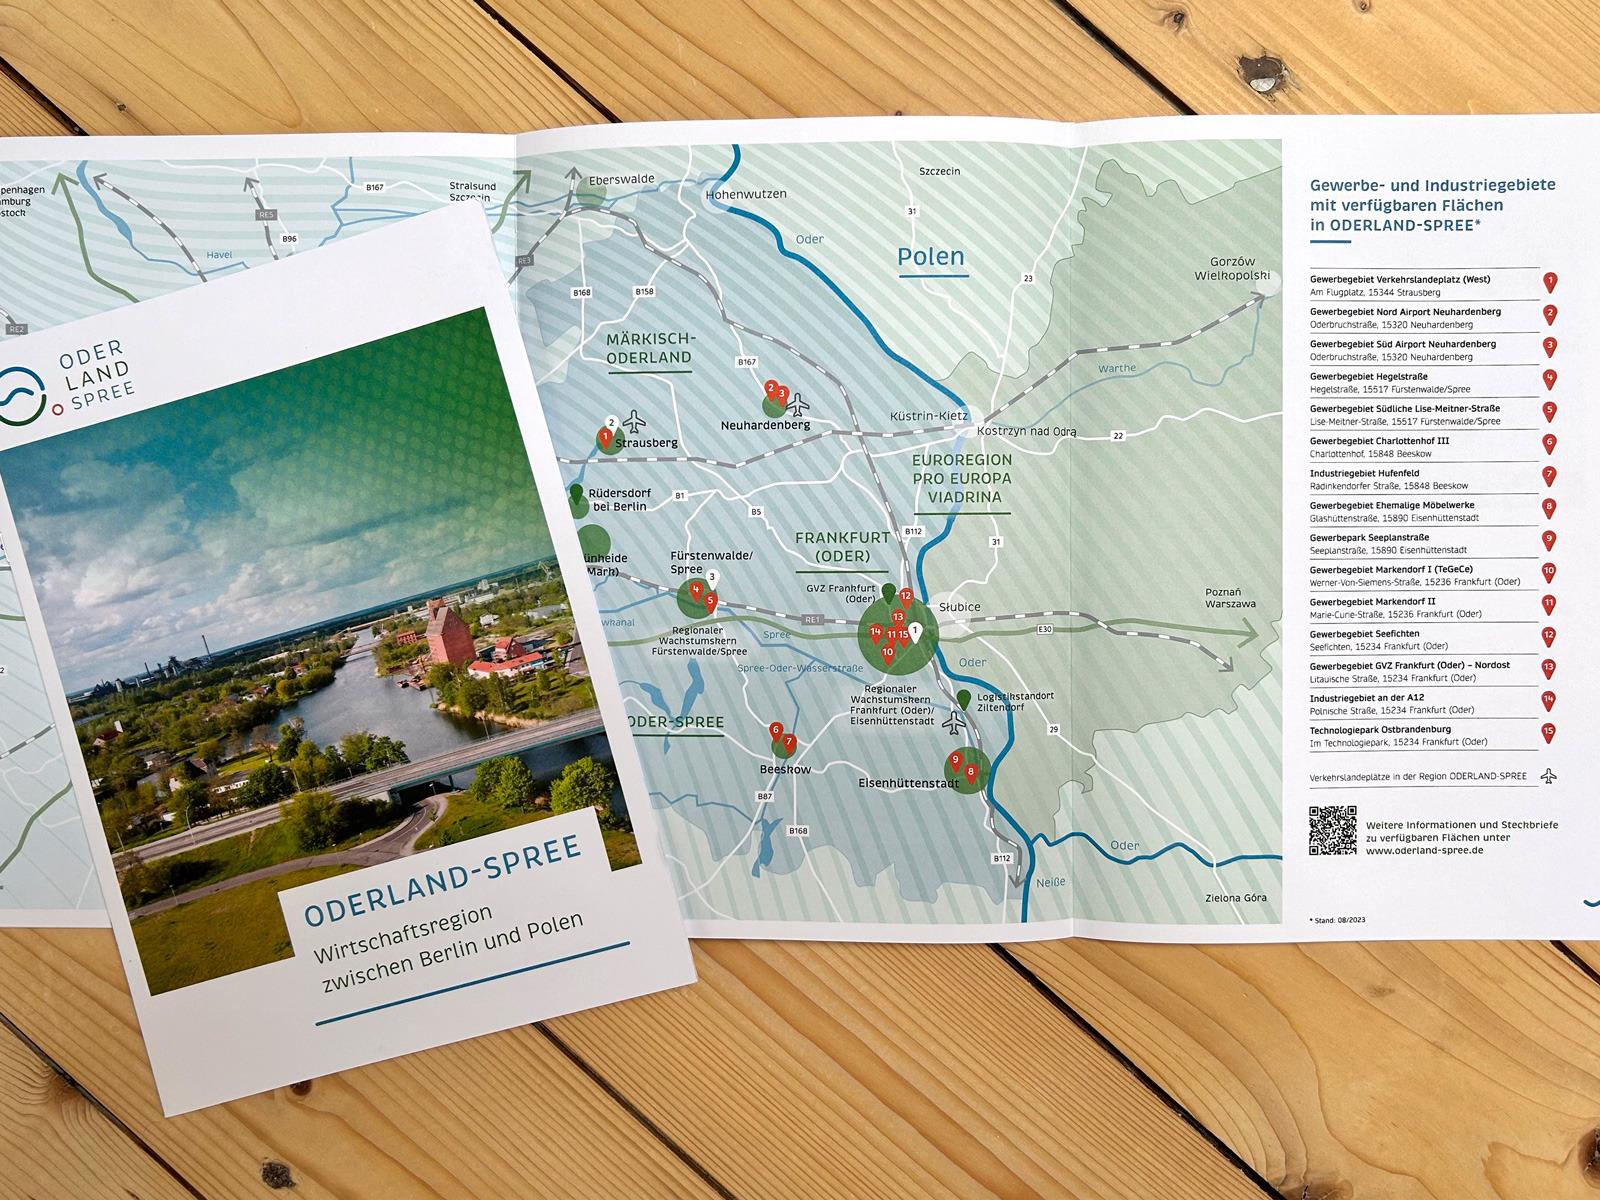 Title and inside pages with cartographic overview of the Oderland-Spree regional brochure © fischundblume